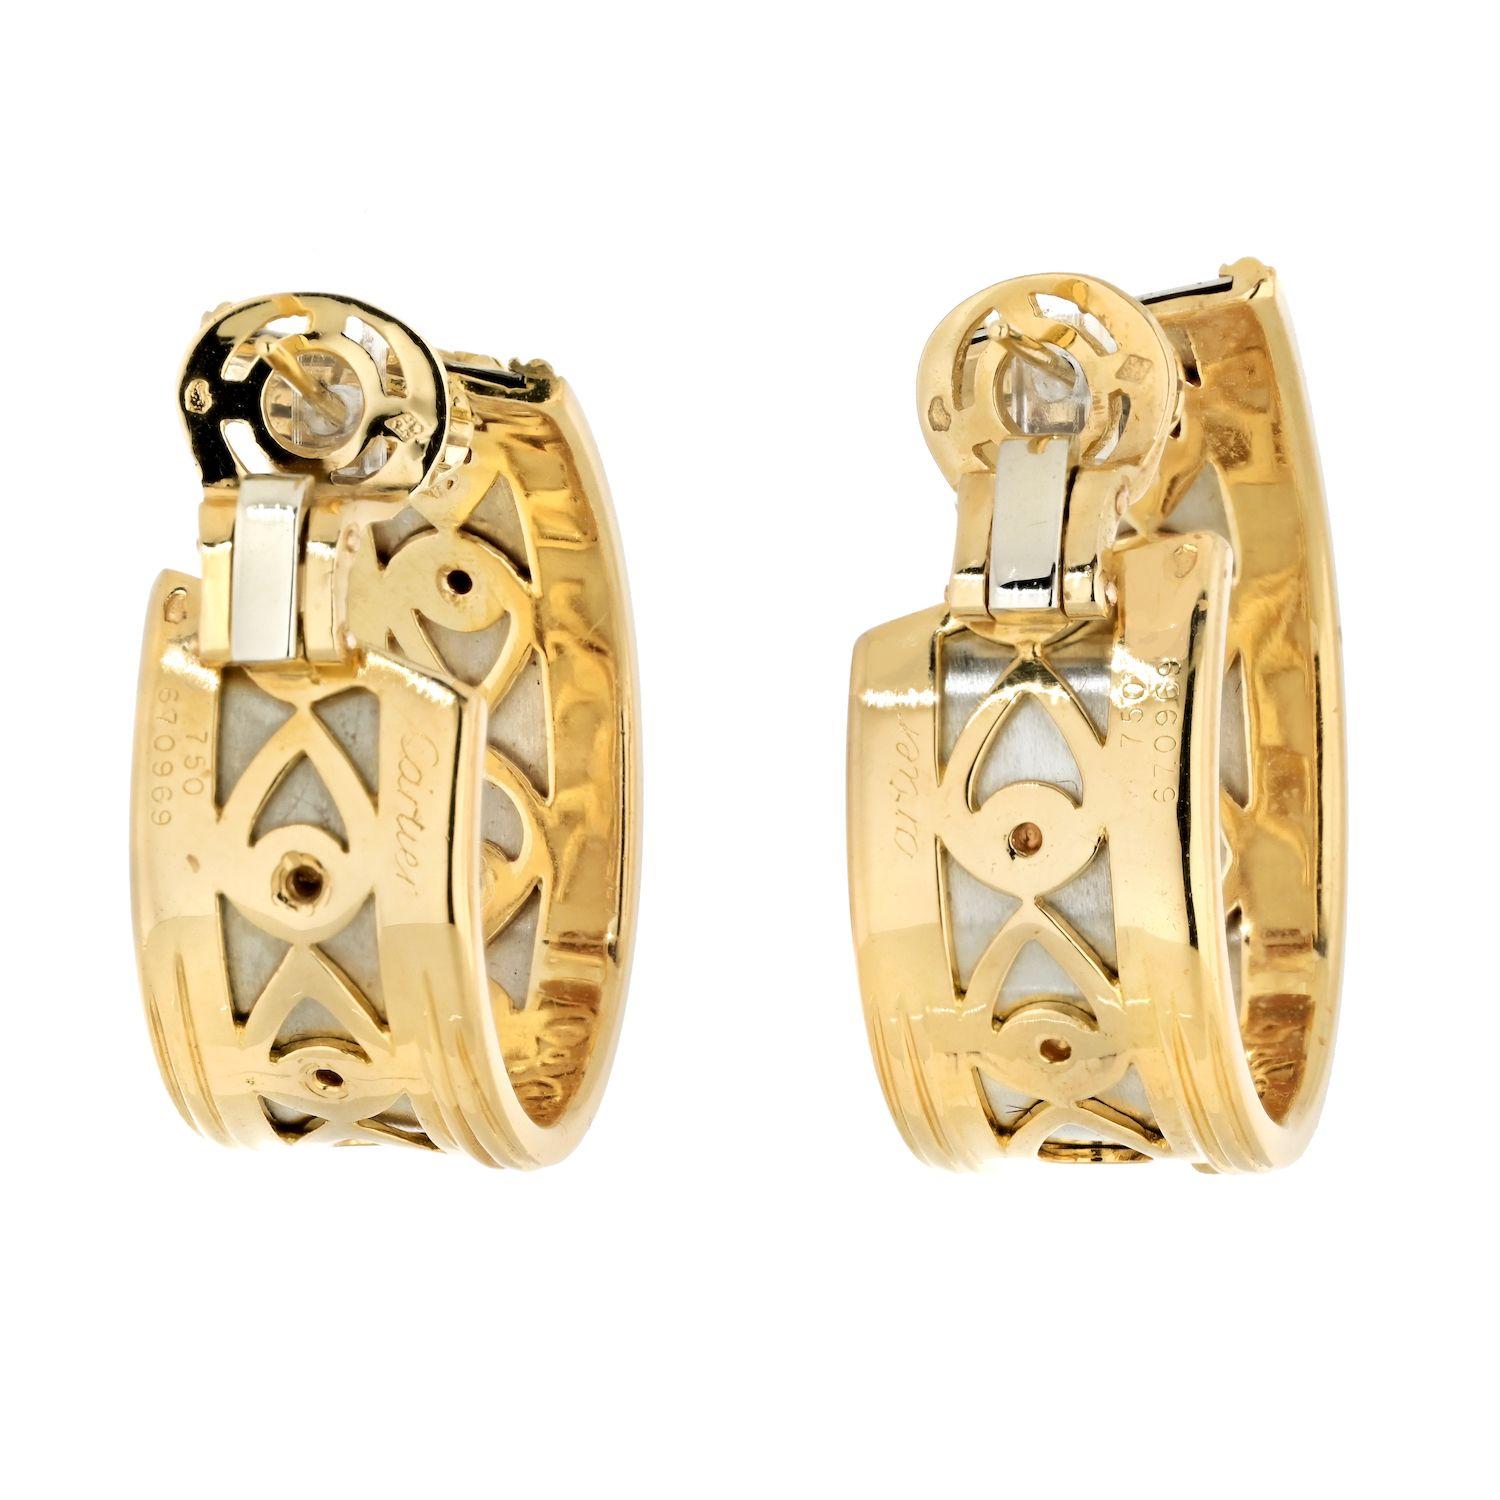 Cartier Vintage Panthère de Cartier walking panther hoop earrings in 18kt yellow gold, French, 1980s. A true collector#s piece, each of these earrings is designed as a wide hoop featuring three walking panthers. This pair of earrings is an iconic